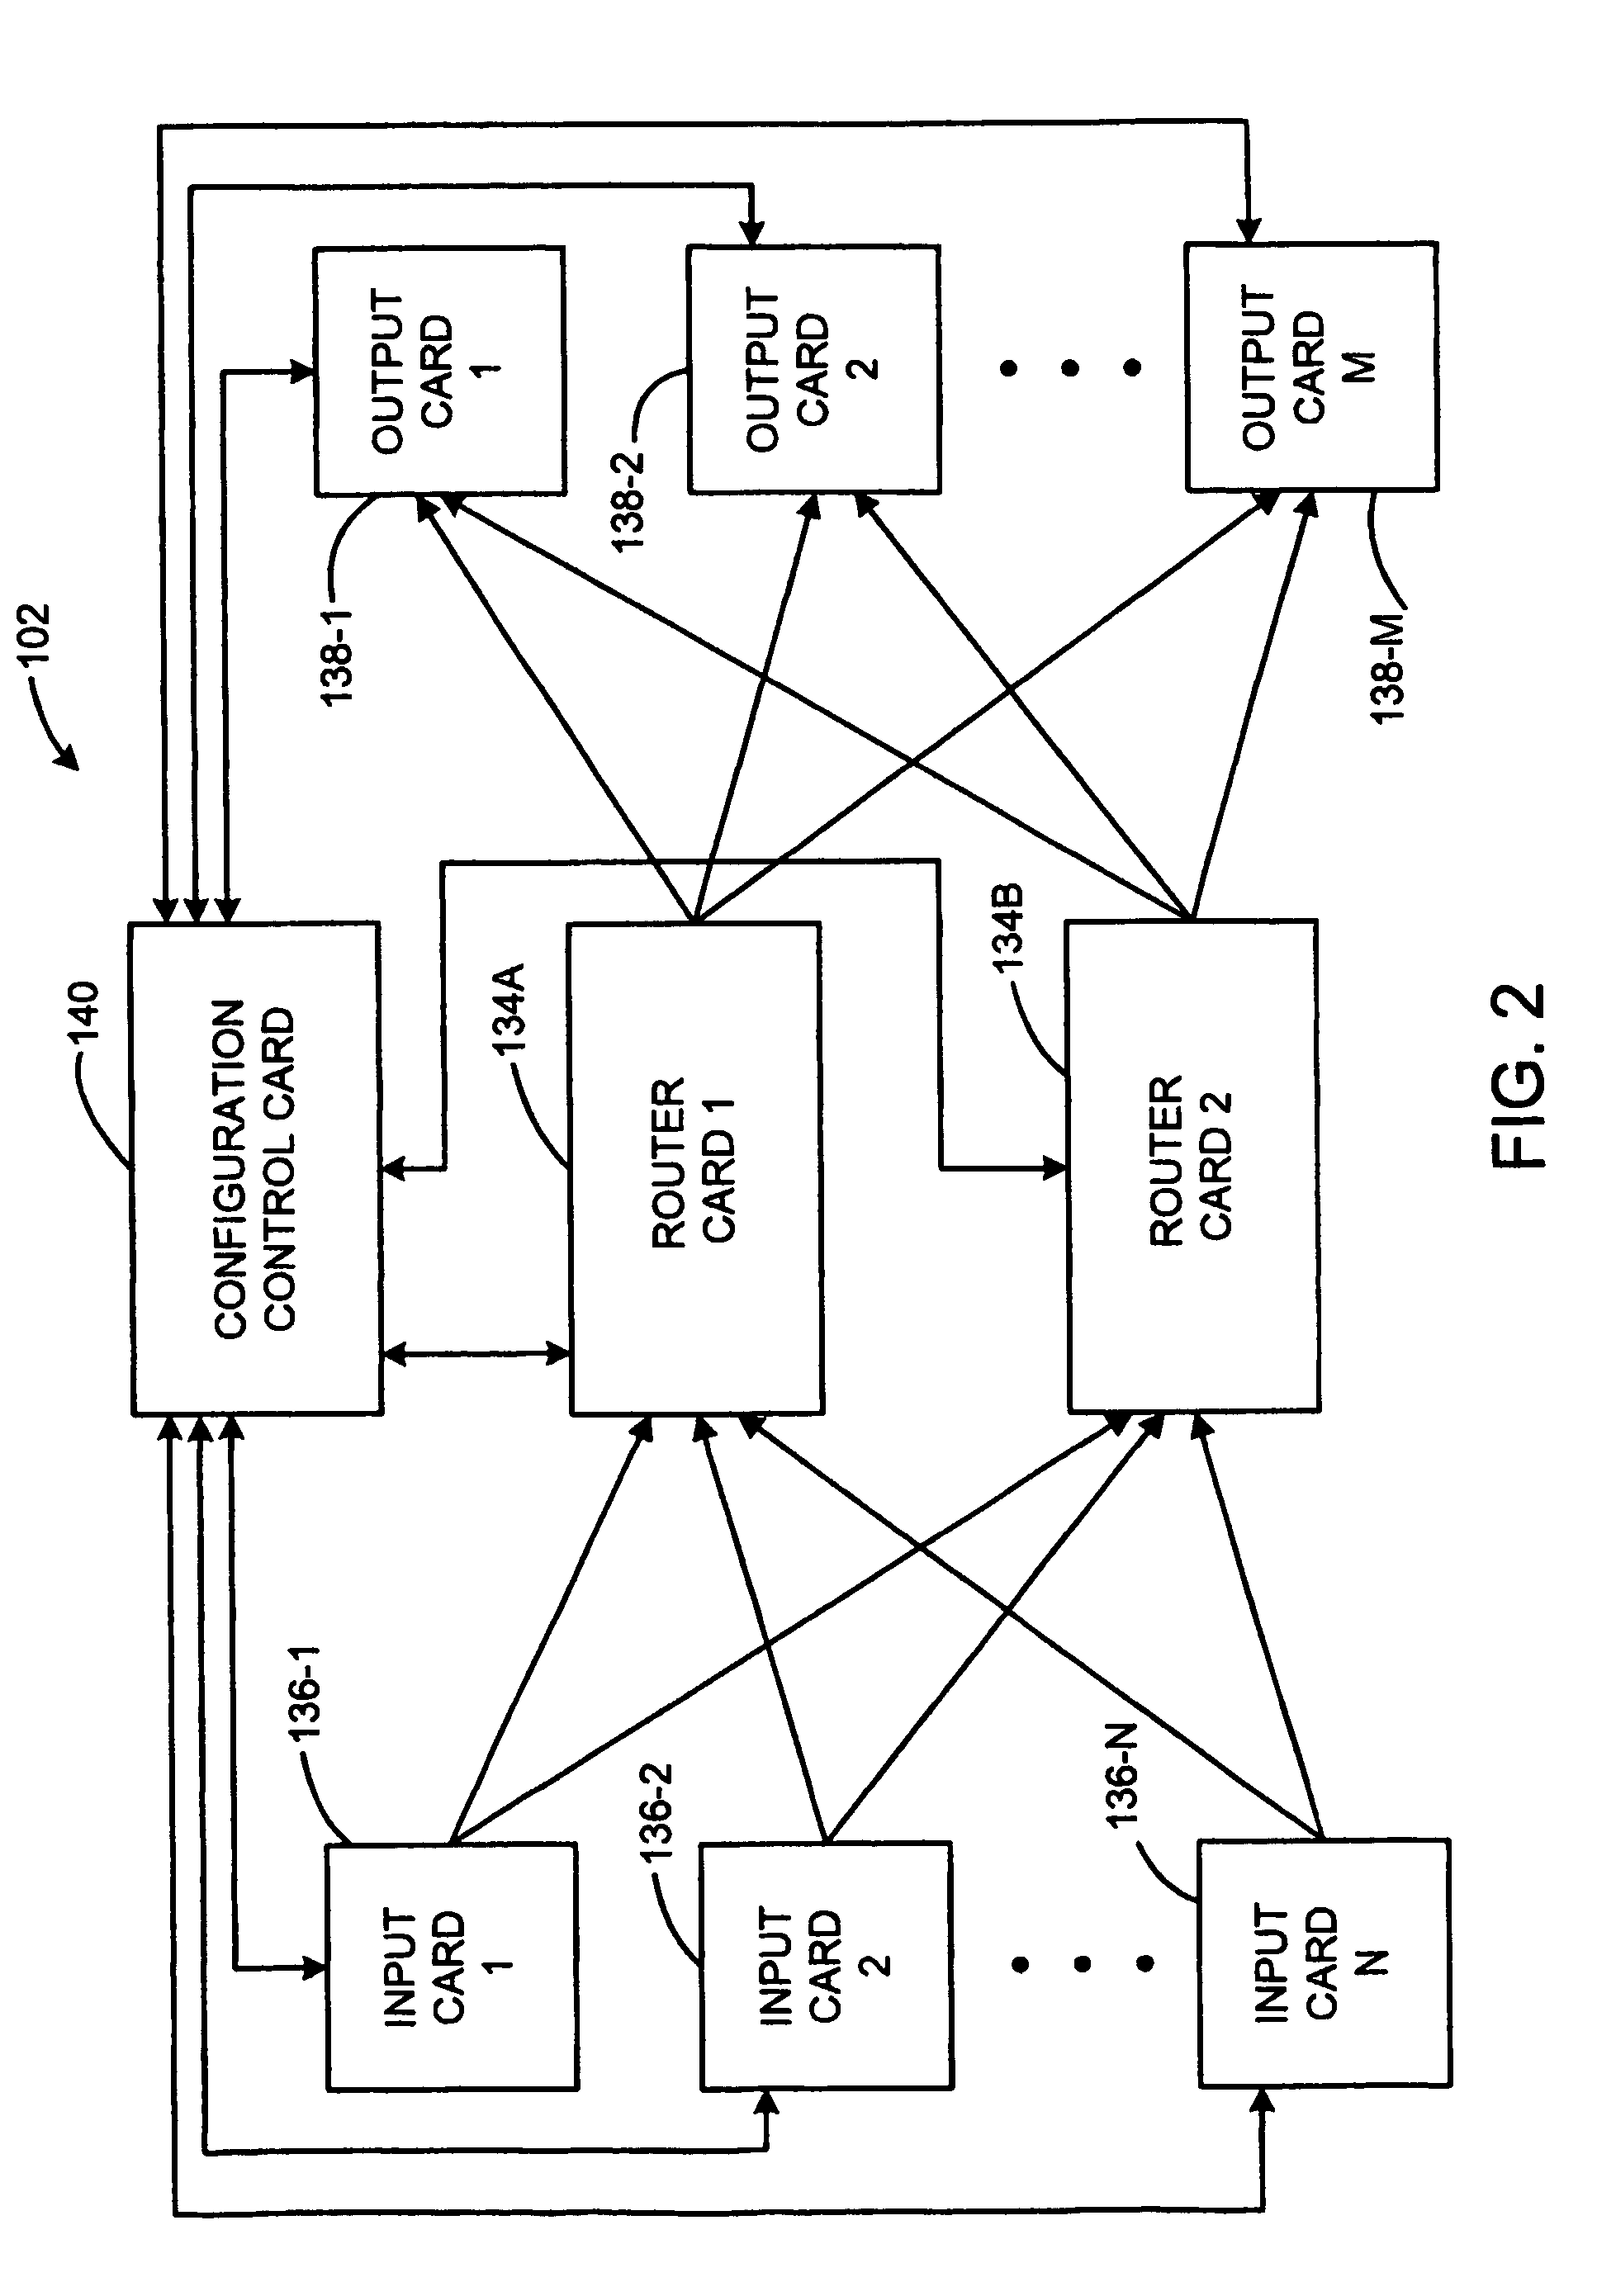 Broadcast router having a shared configuration repository